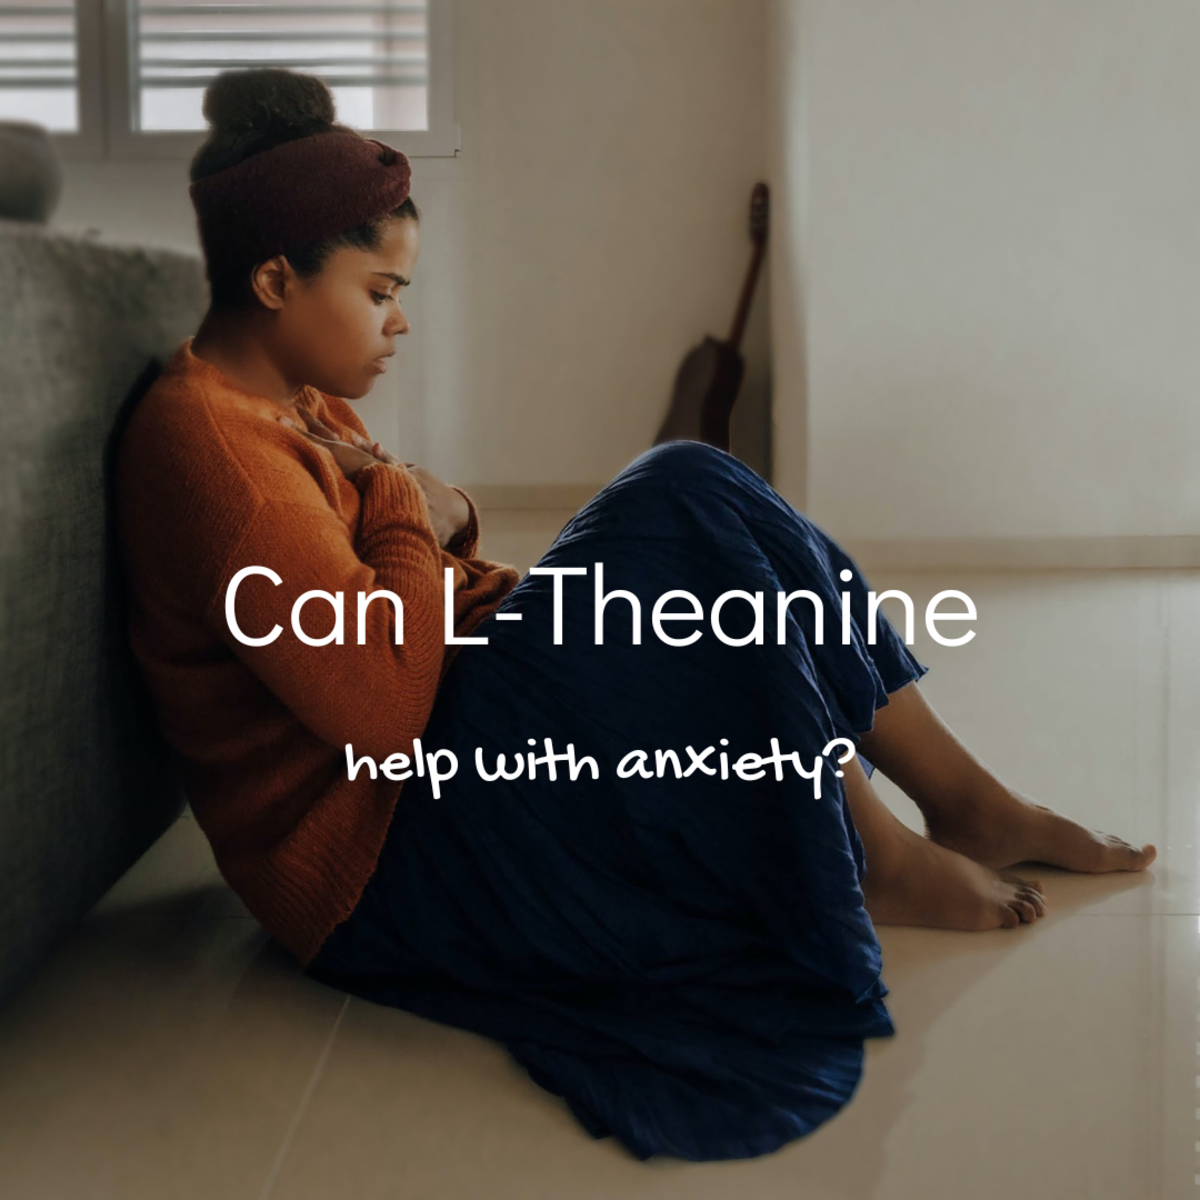 Can L-Theanine help with anxiety?